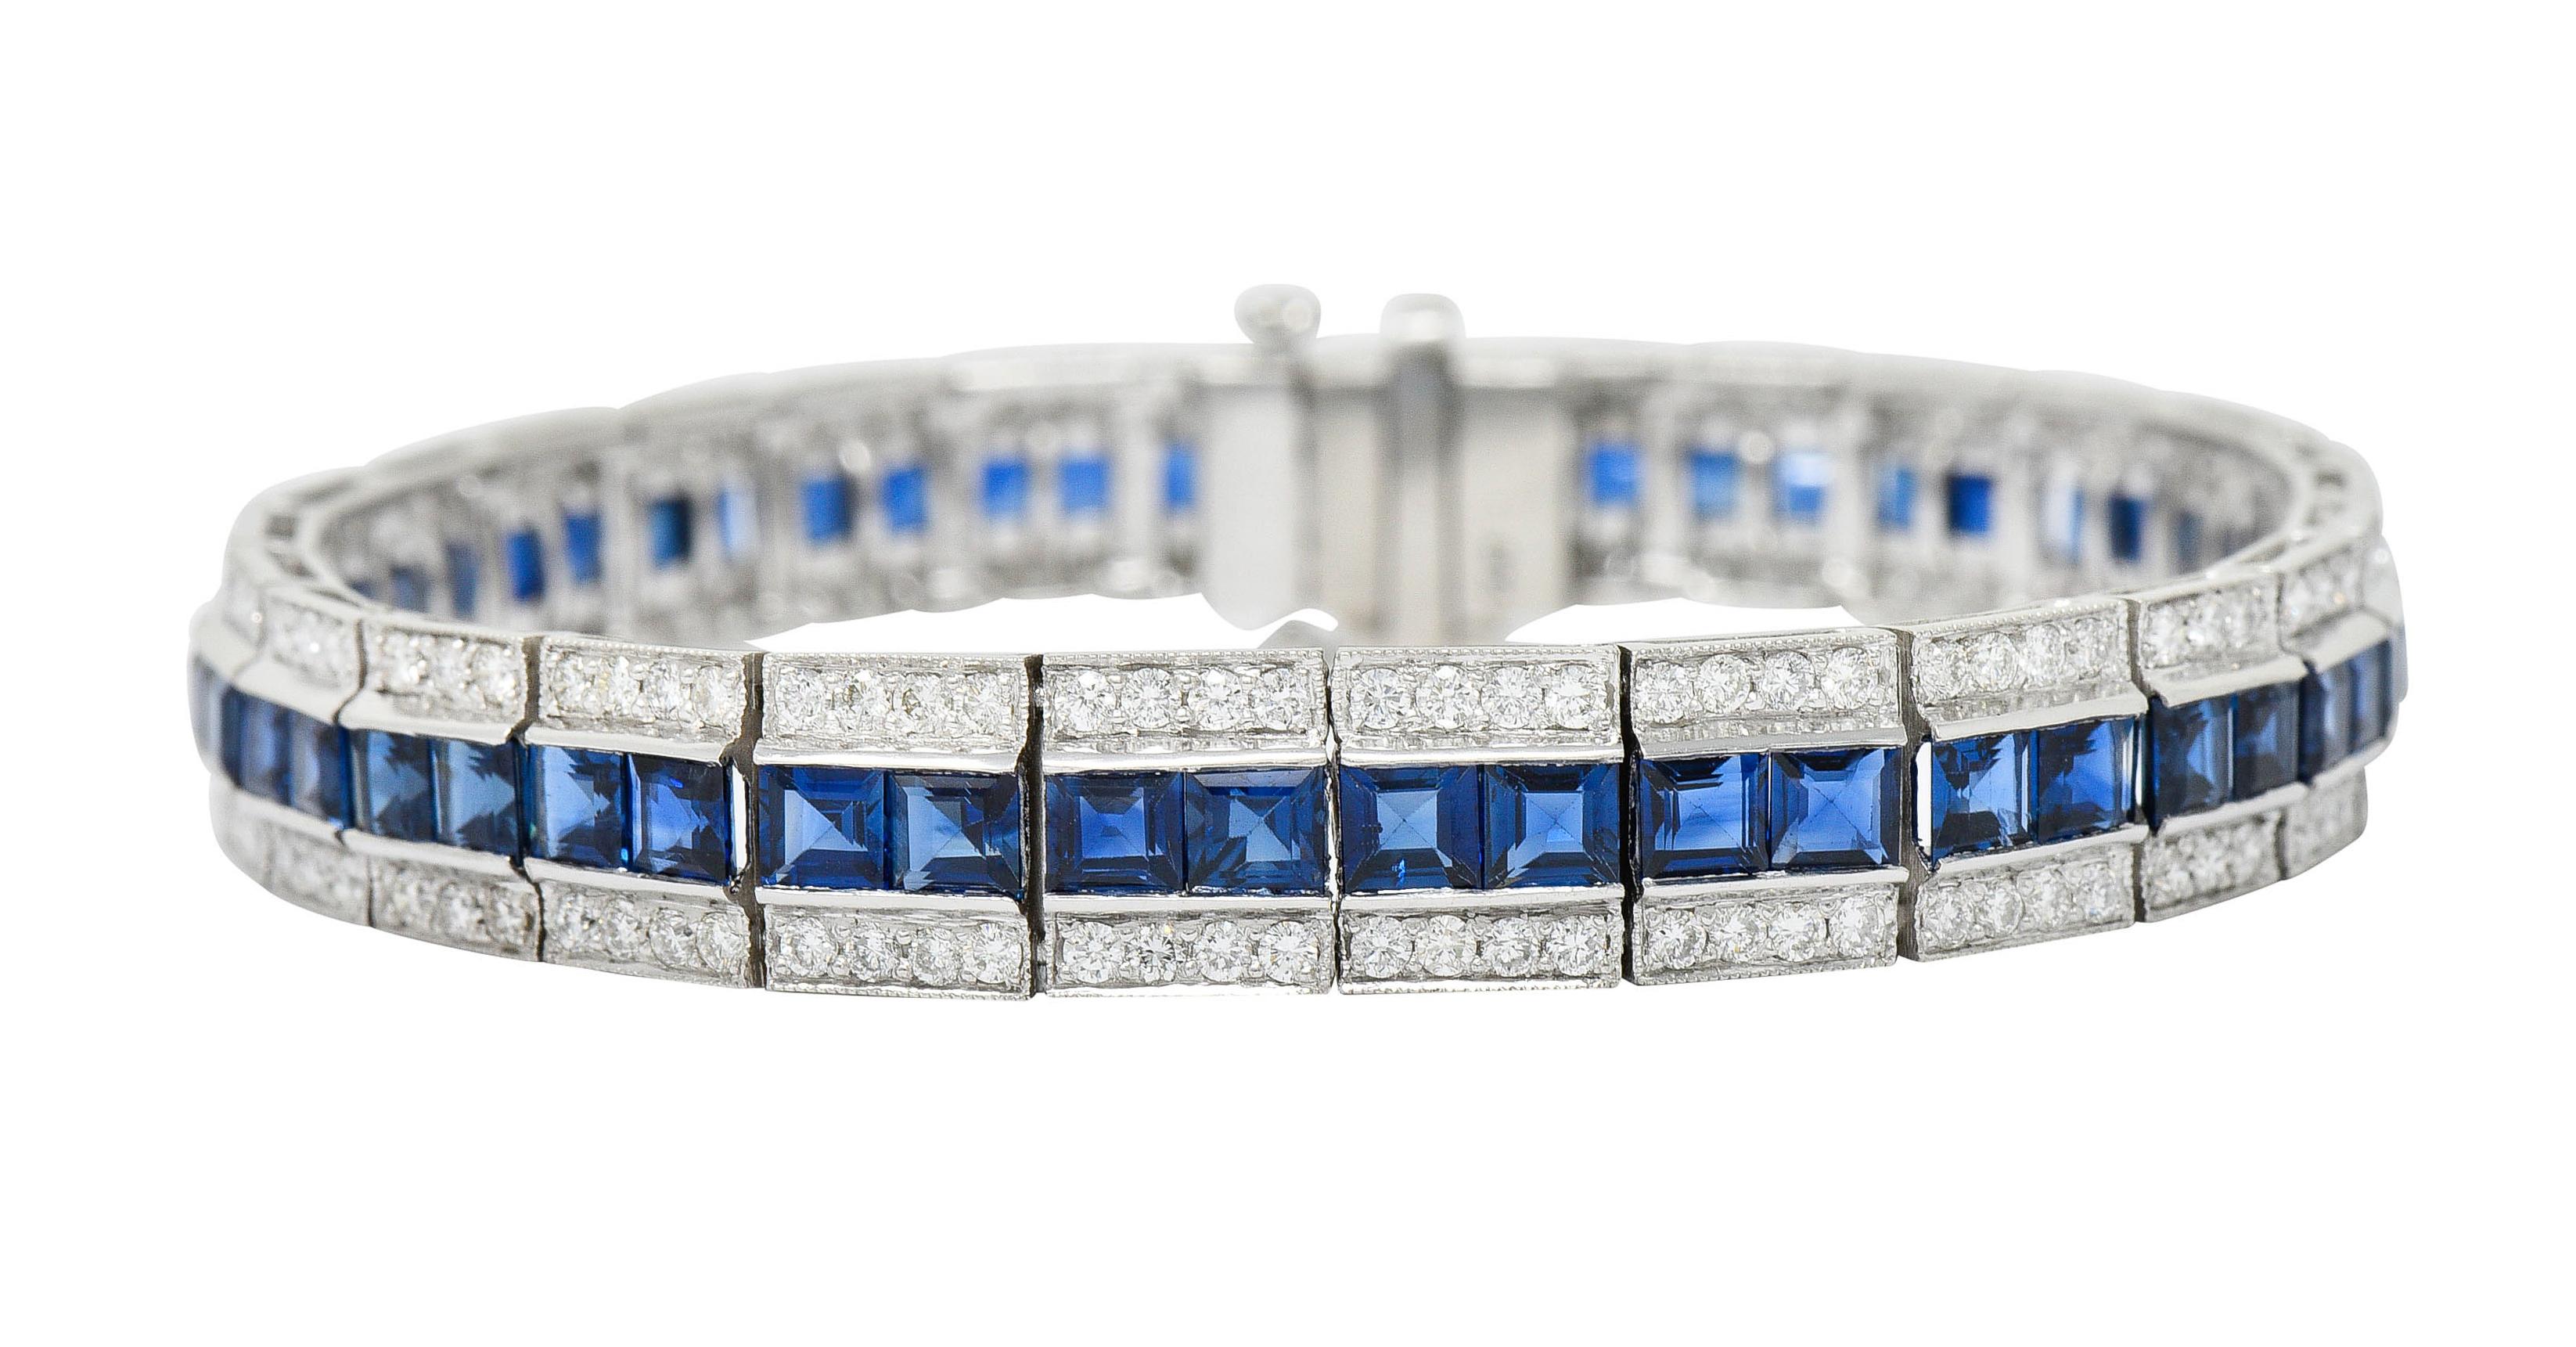 Wide line bracelet is comprised of rectangular links

Centering channel set square cut sapphires that subtly graduate in size

Very well matched, transparent, and royal blue in color while weighing approximately 10.65 carats total

Accented by round